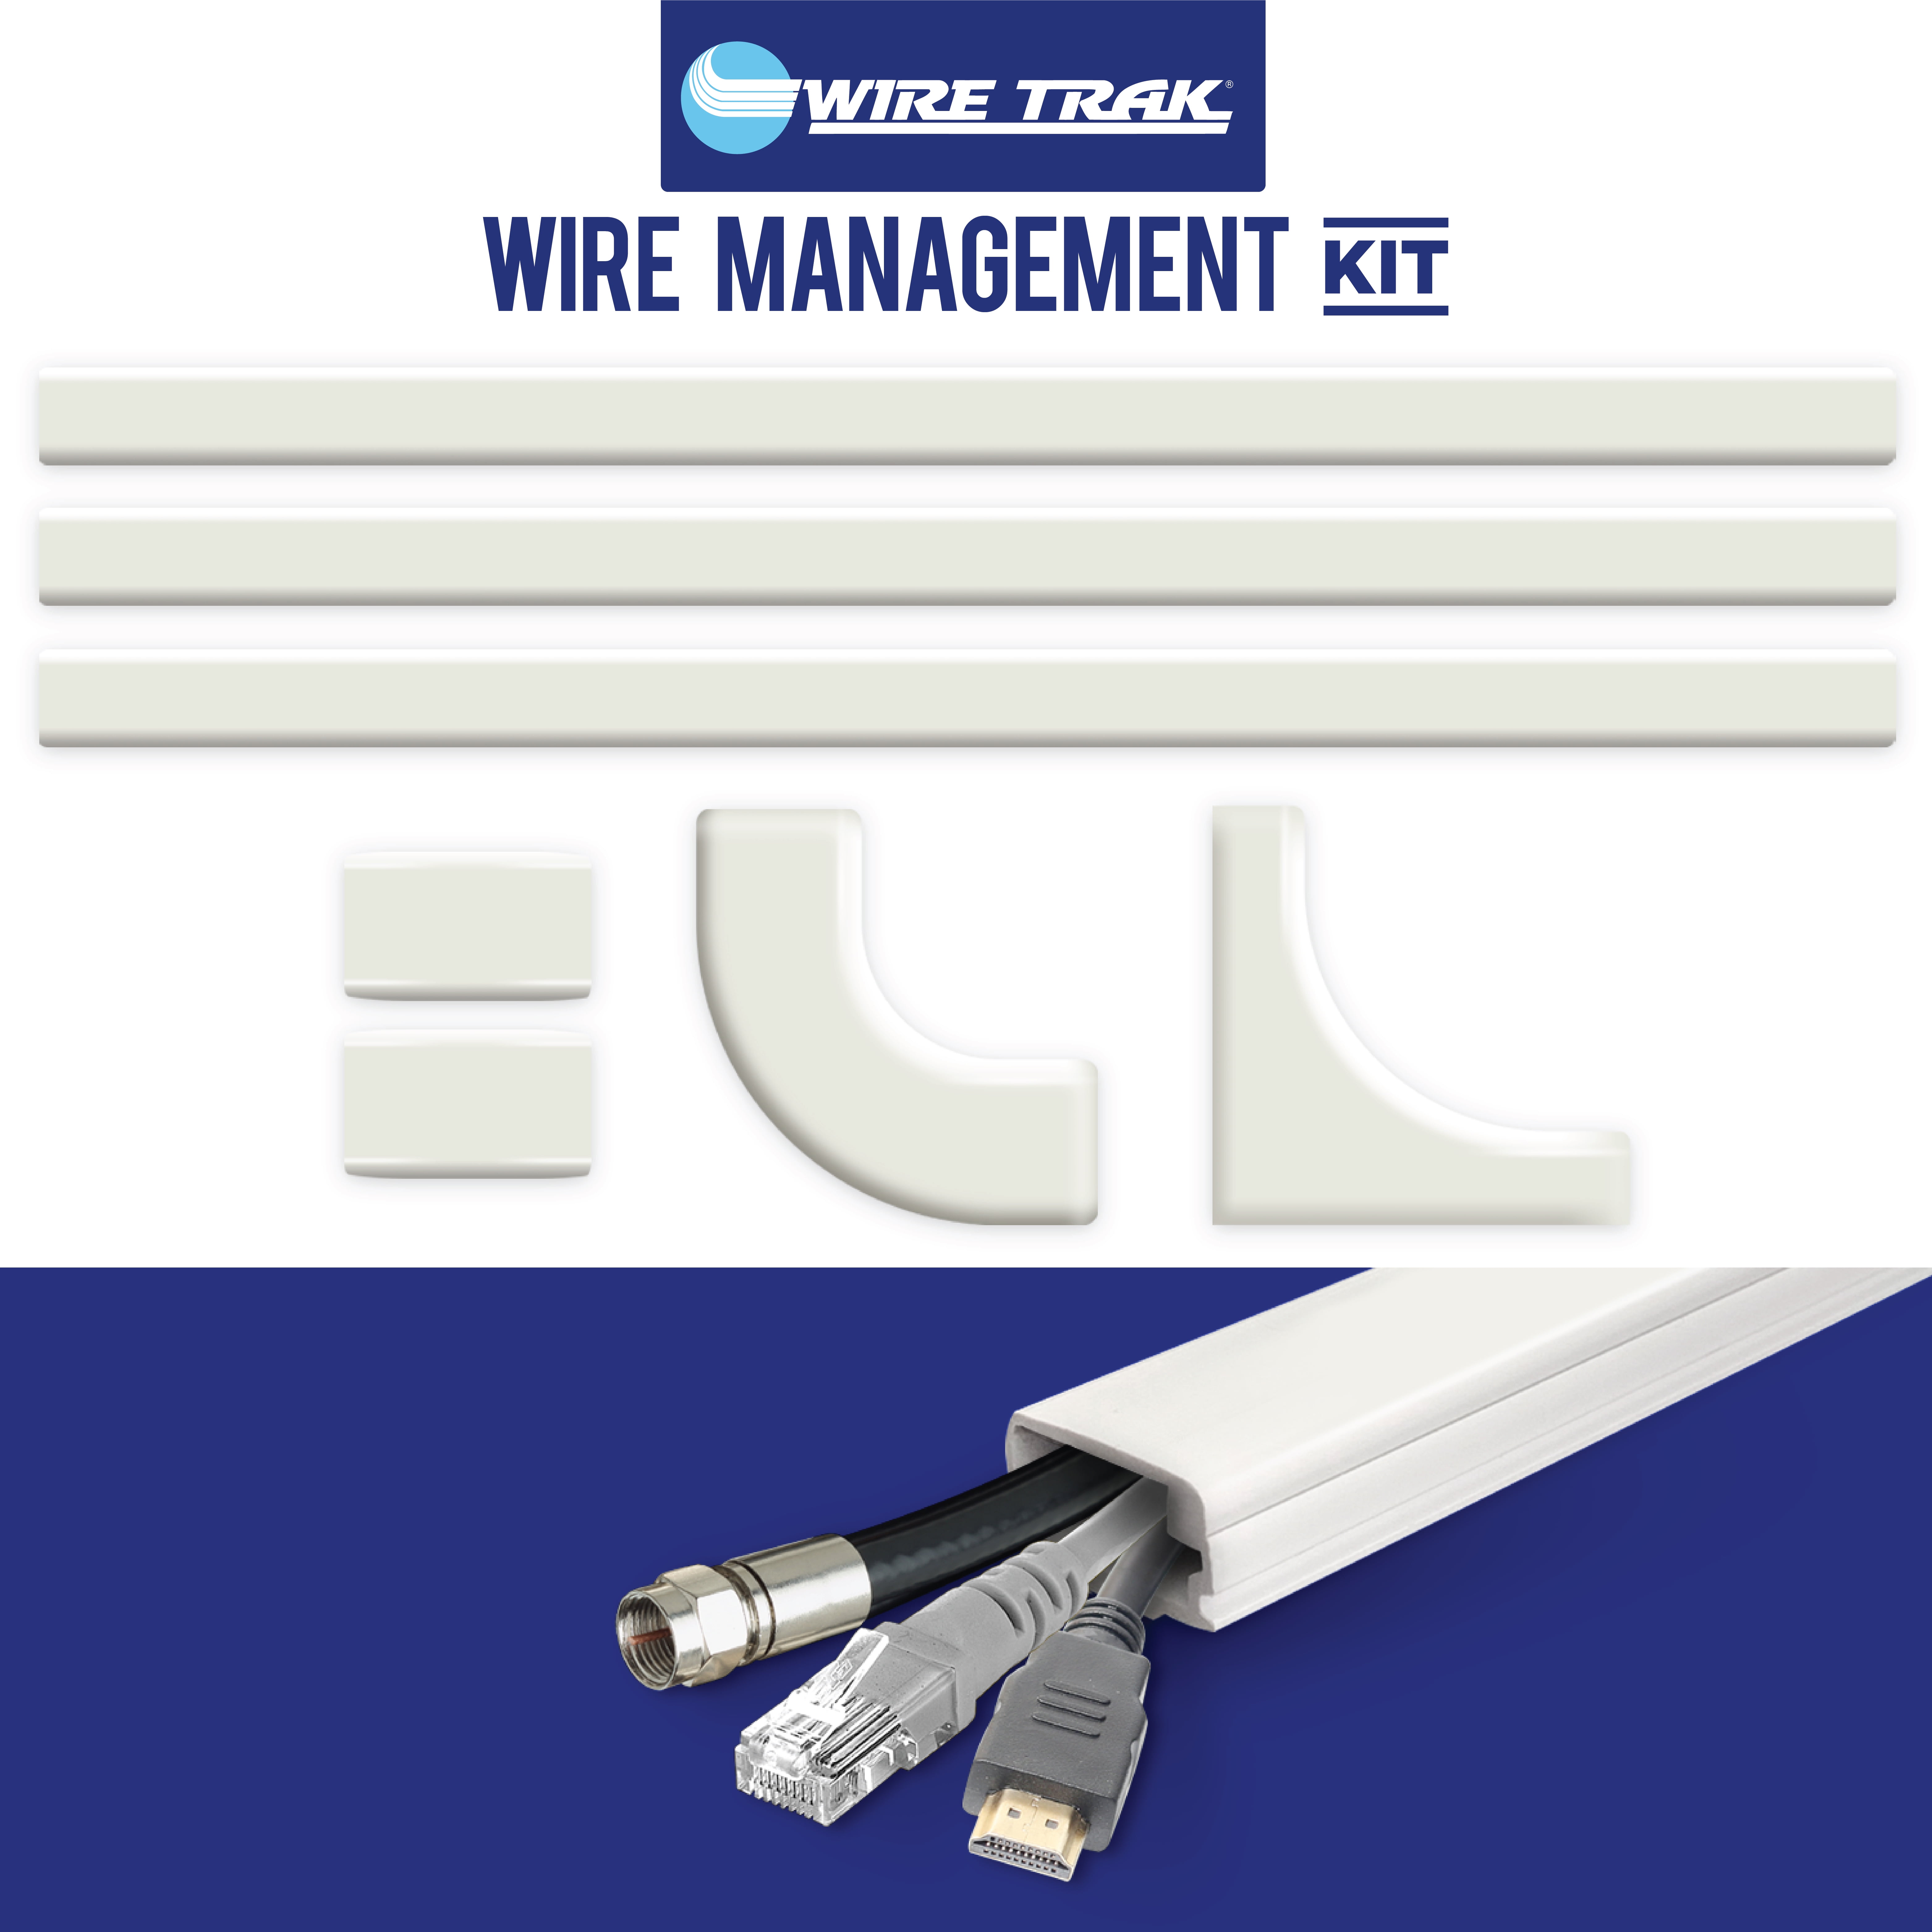 Wire Trak Wire Management Kit, Peel and Stick Adhesive